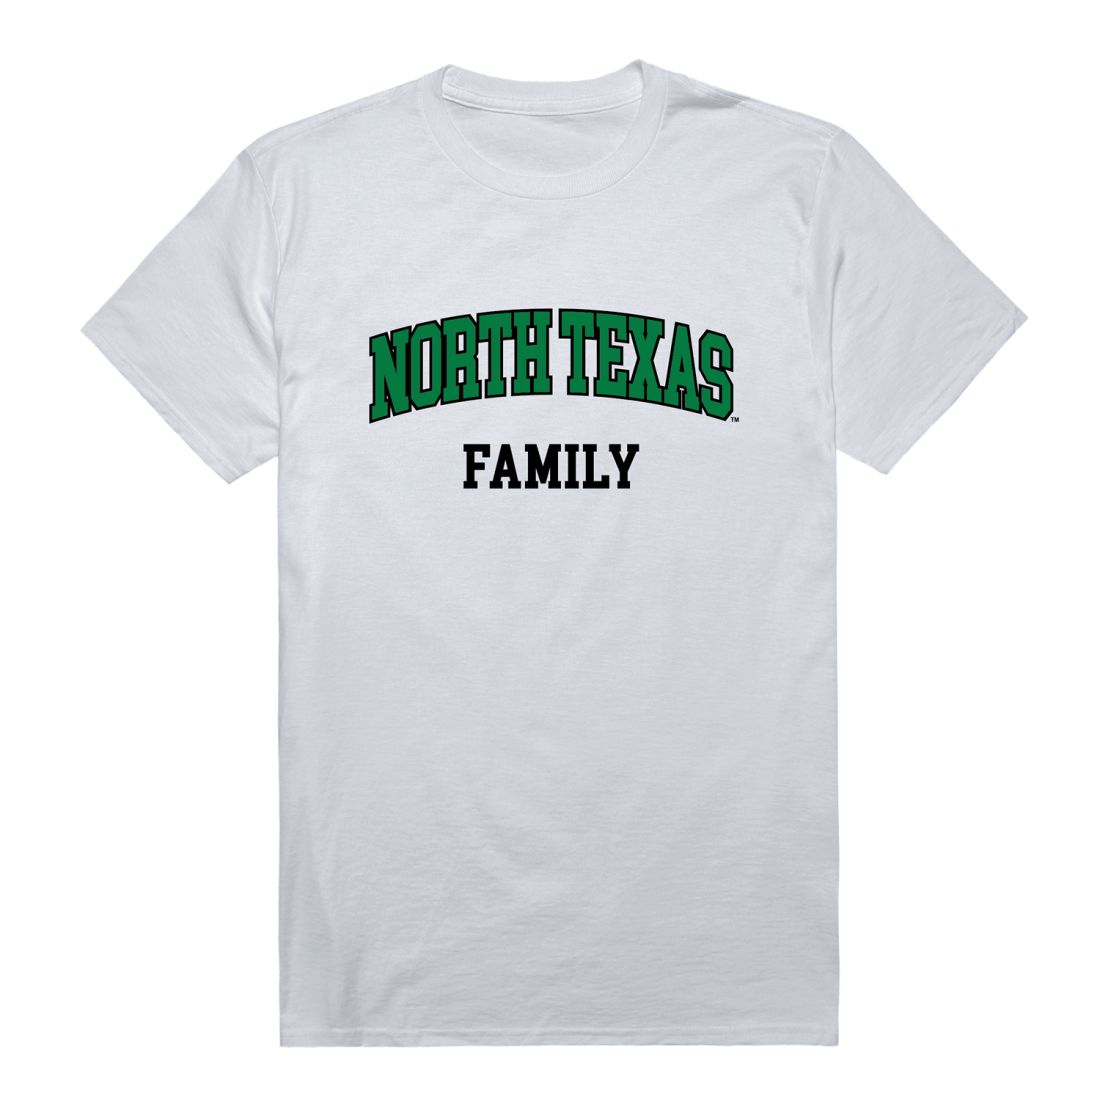 UNT University of North Texas Mean Green Family T-Shirt